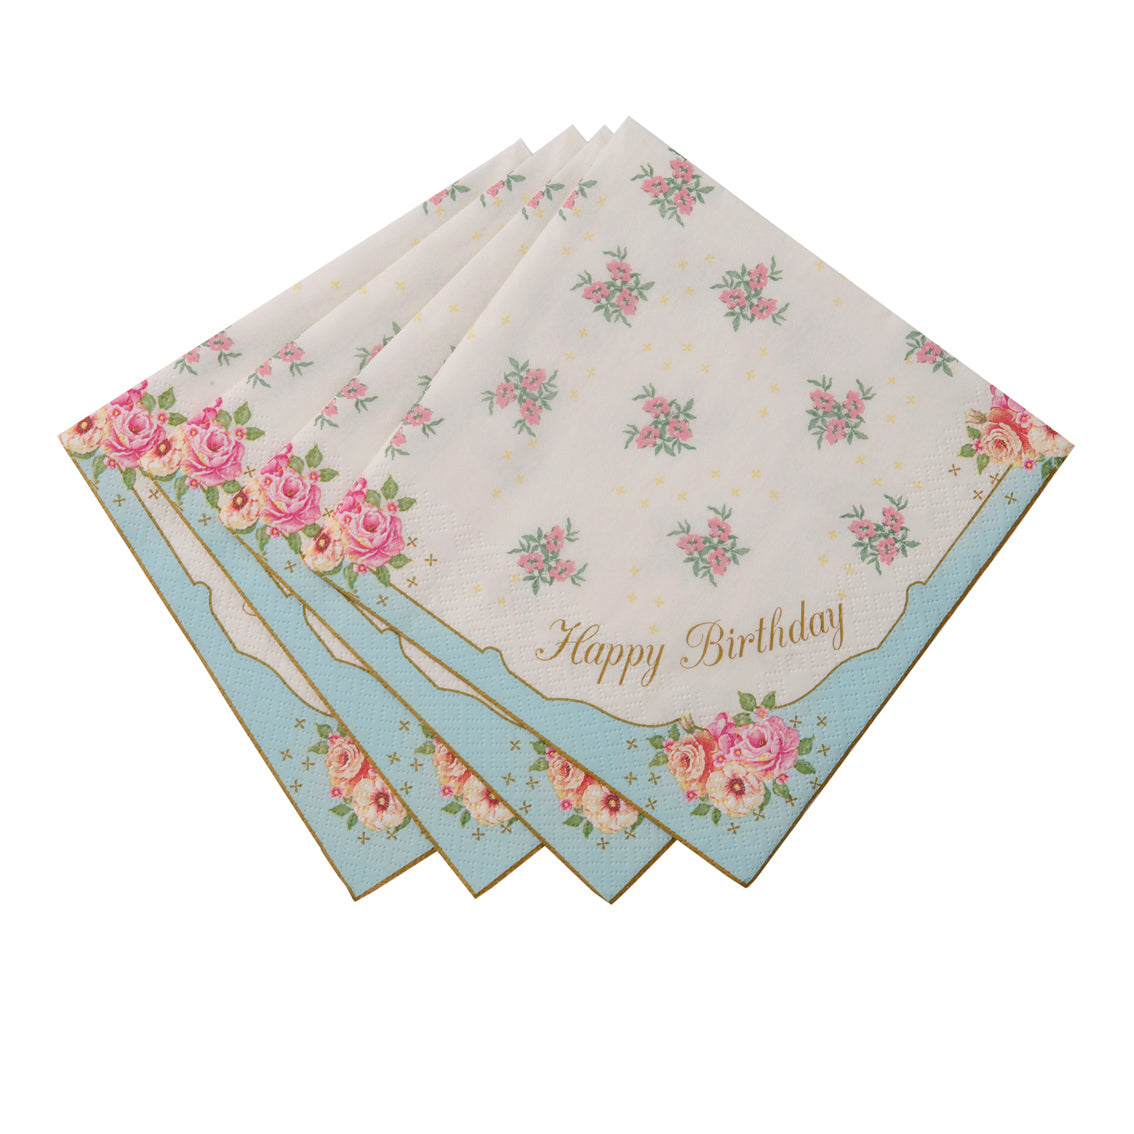 Truly Scrumptious Birthday Napkins Party decorations